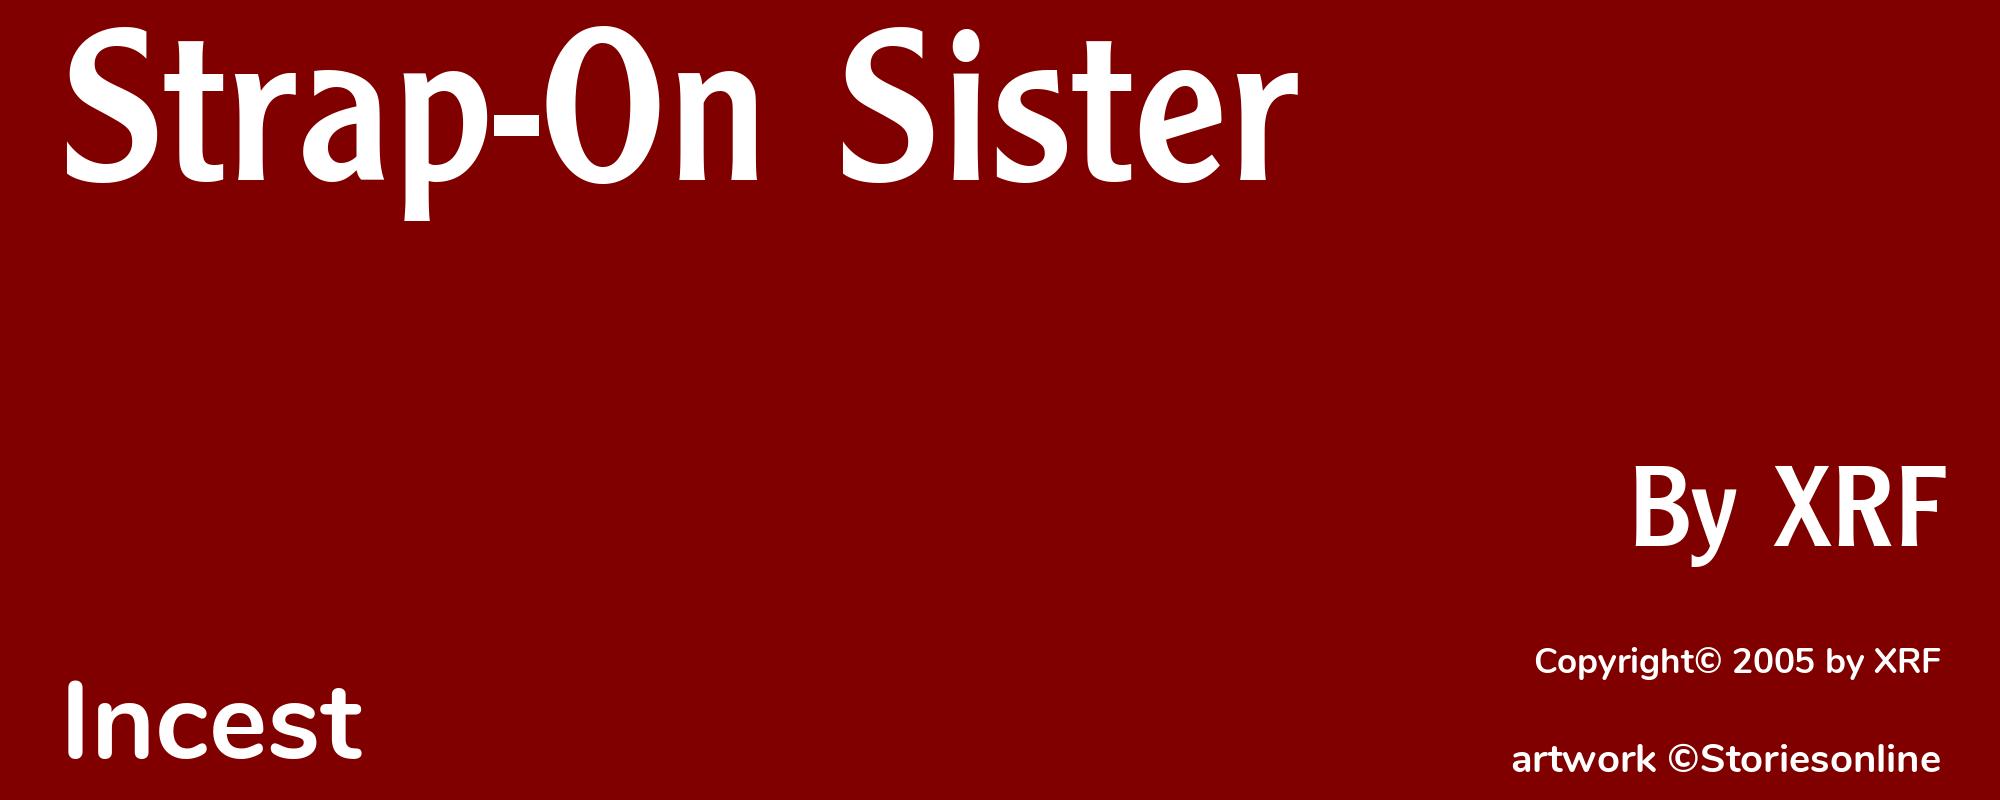 Strap-On Sister - Cover